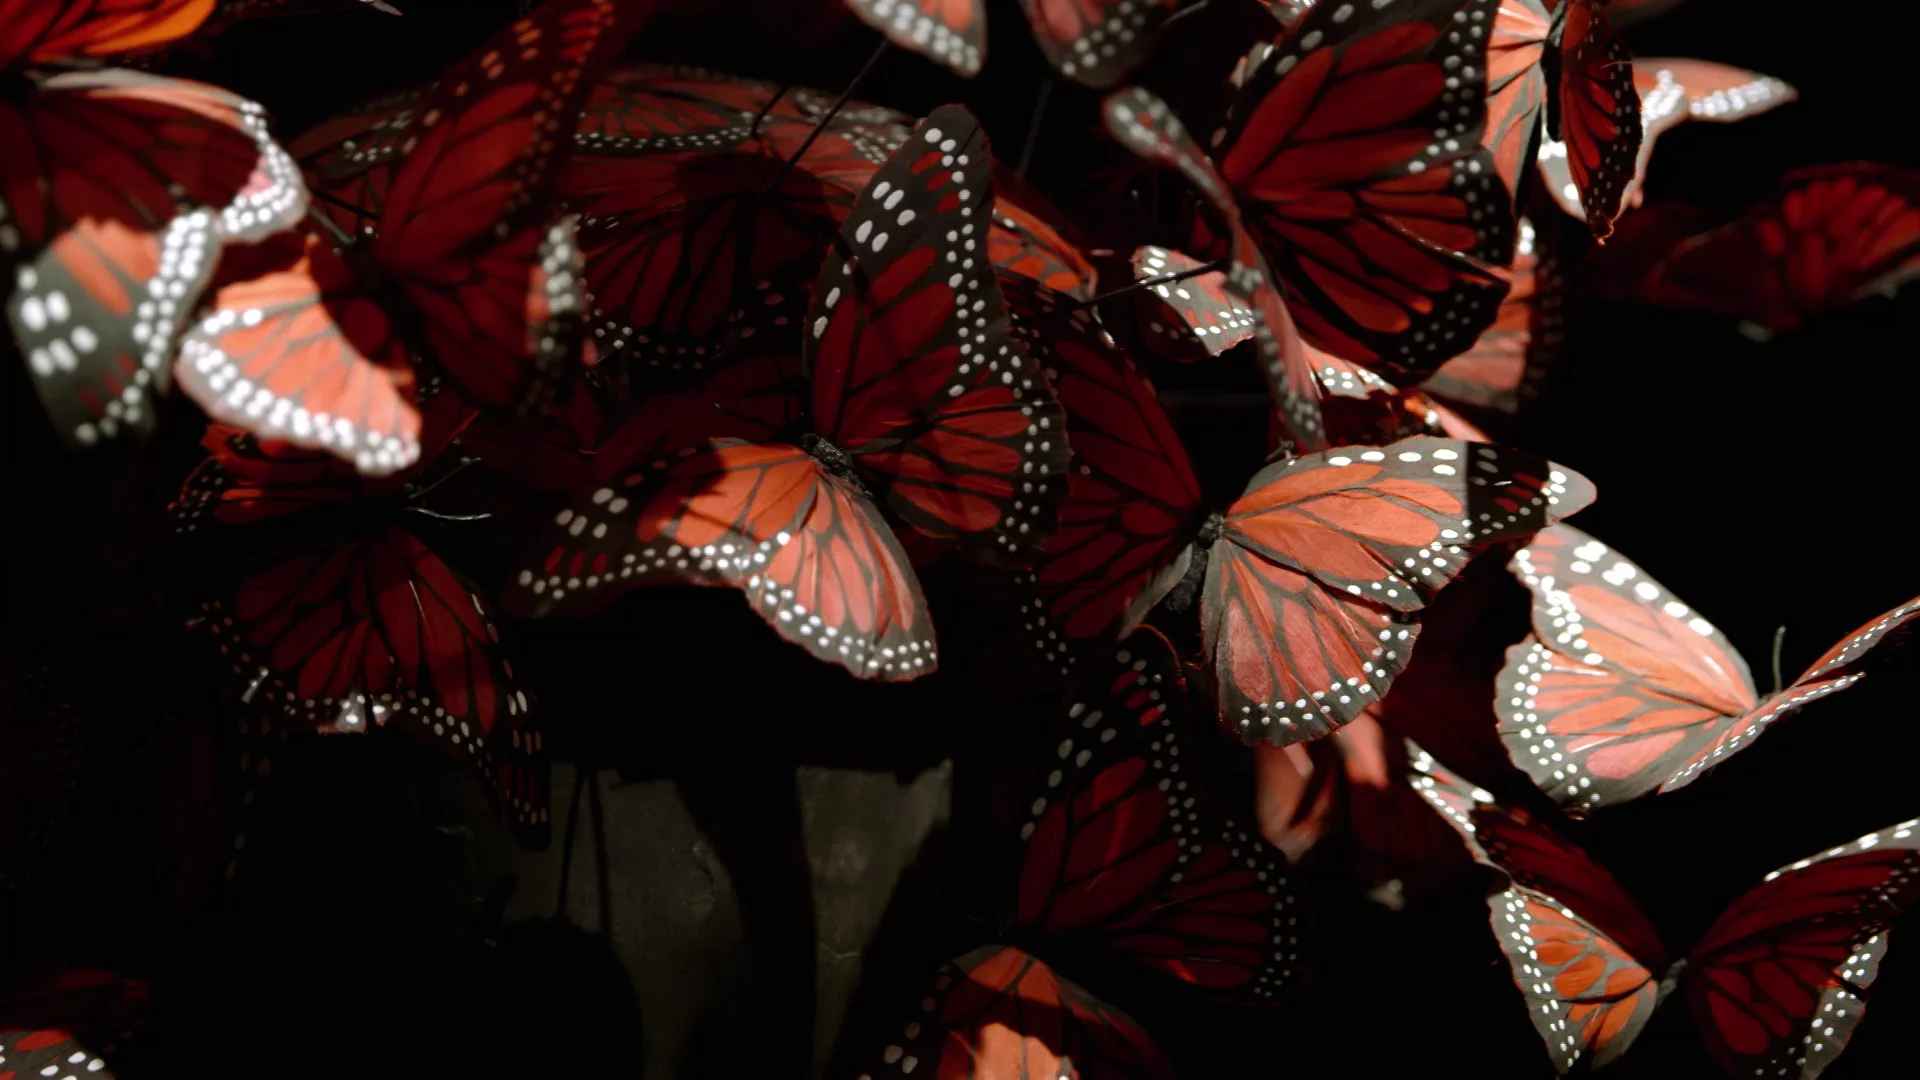 How to get a behind-the-scenes look at the new McQueen collection